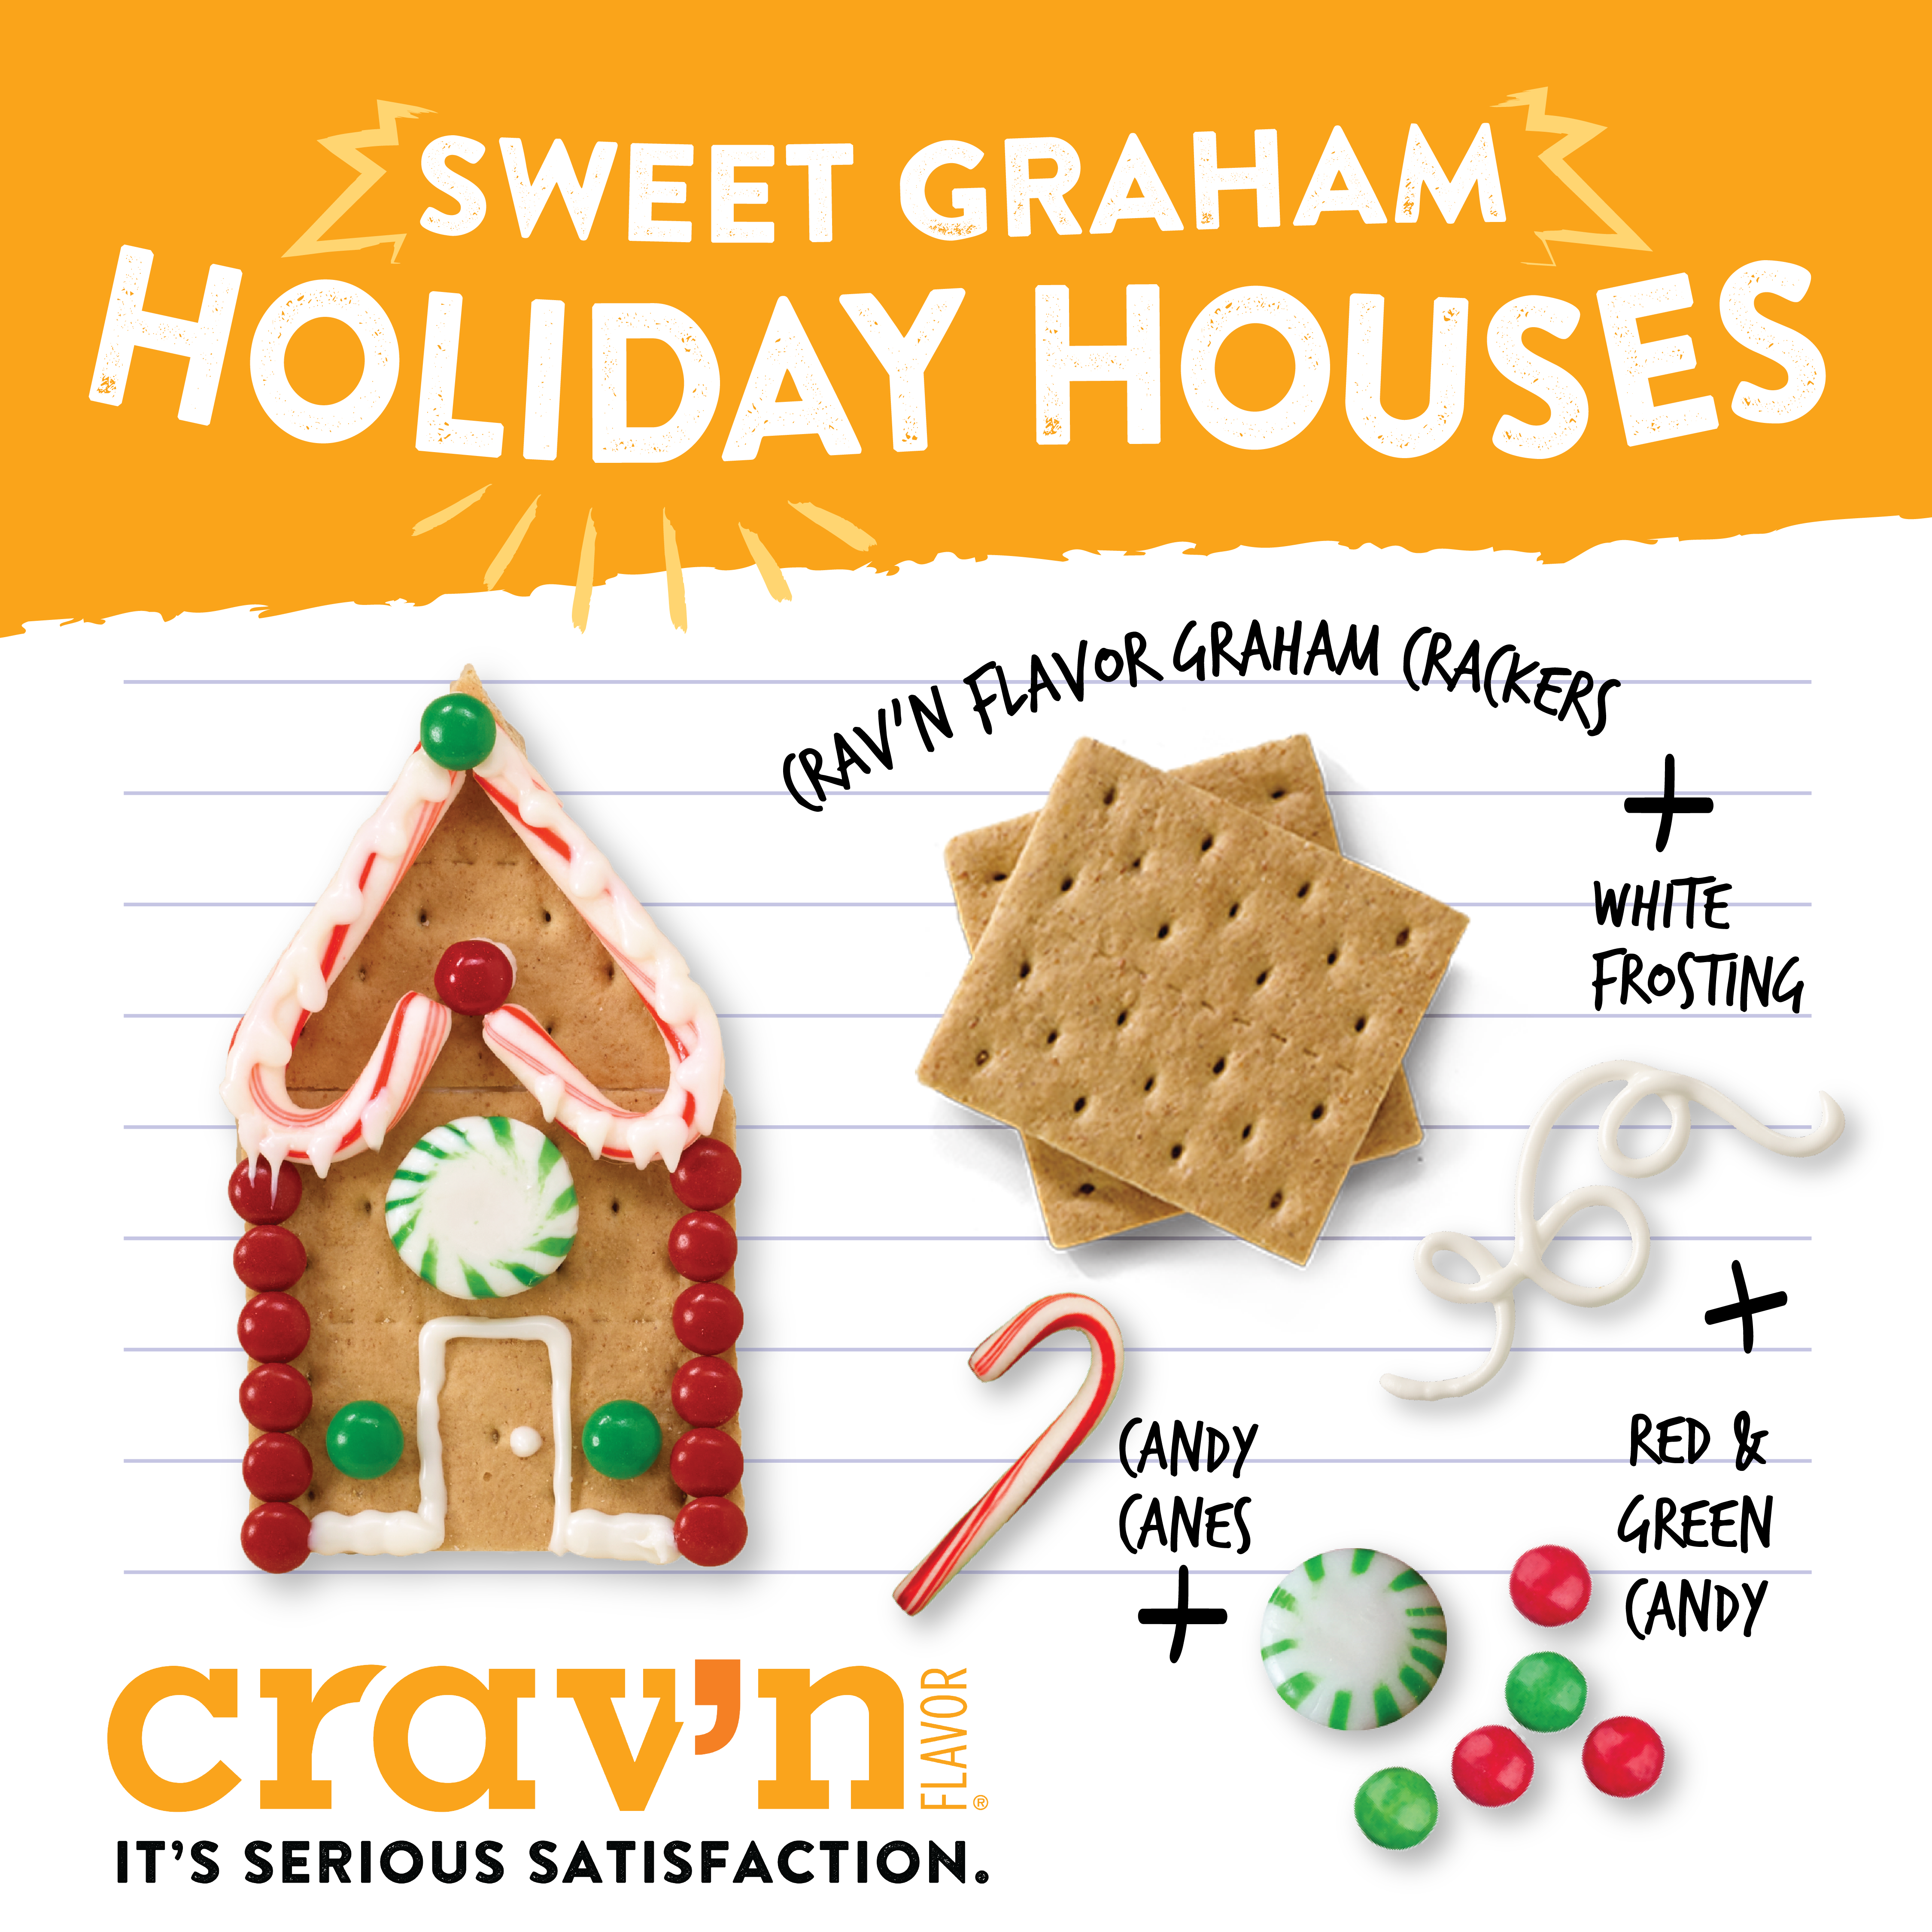 Sweet Graham Holiday Houses